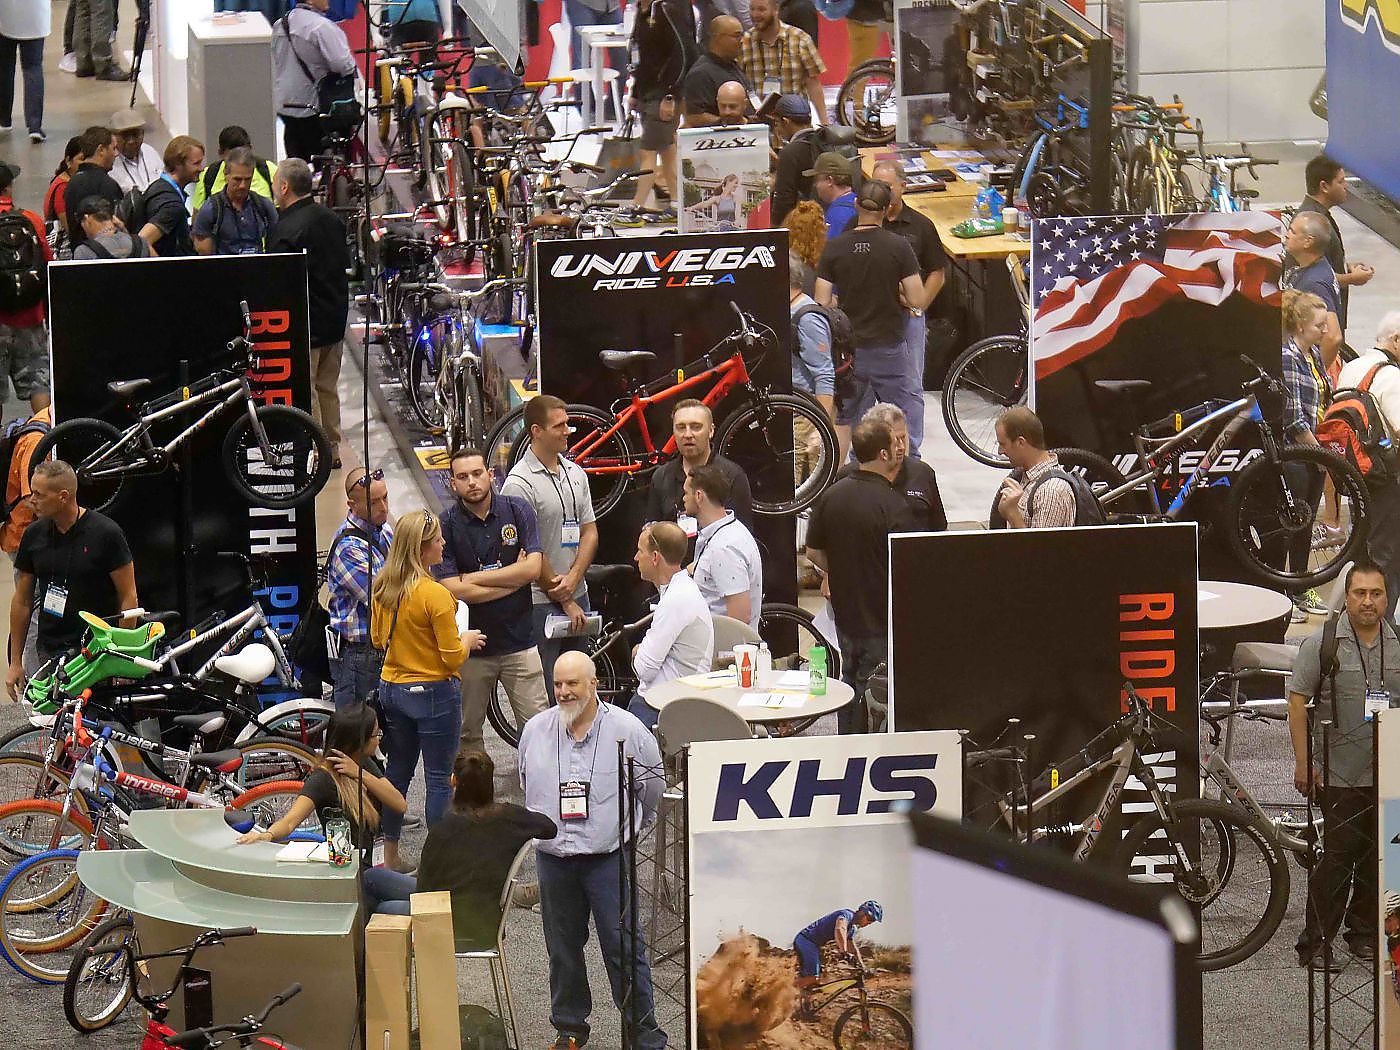 Interbike 2022 Schedule Emerald Surveys Industry On Bringing Back 'Interbike' | Bicycle Retailer  And Industry News